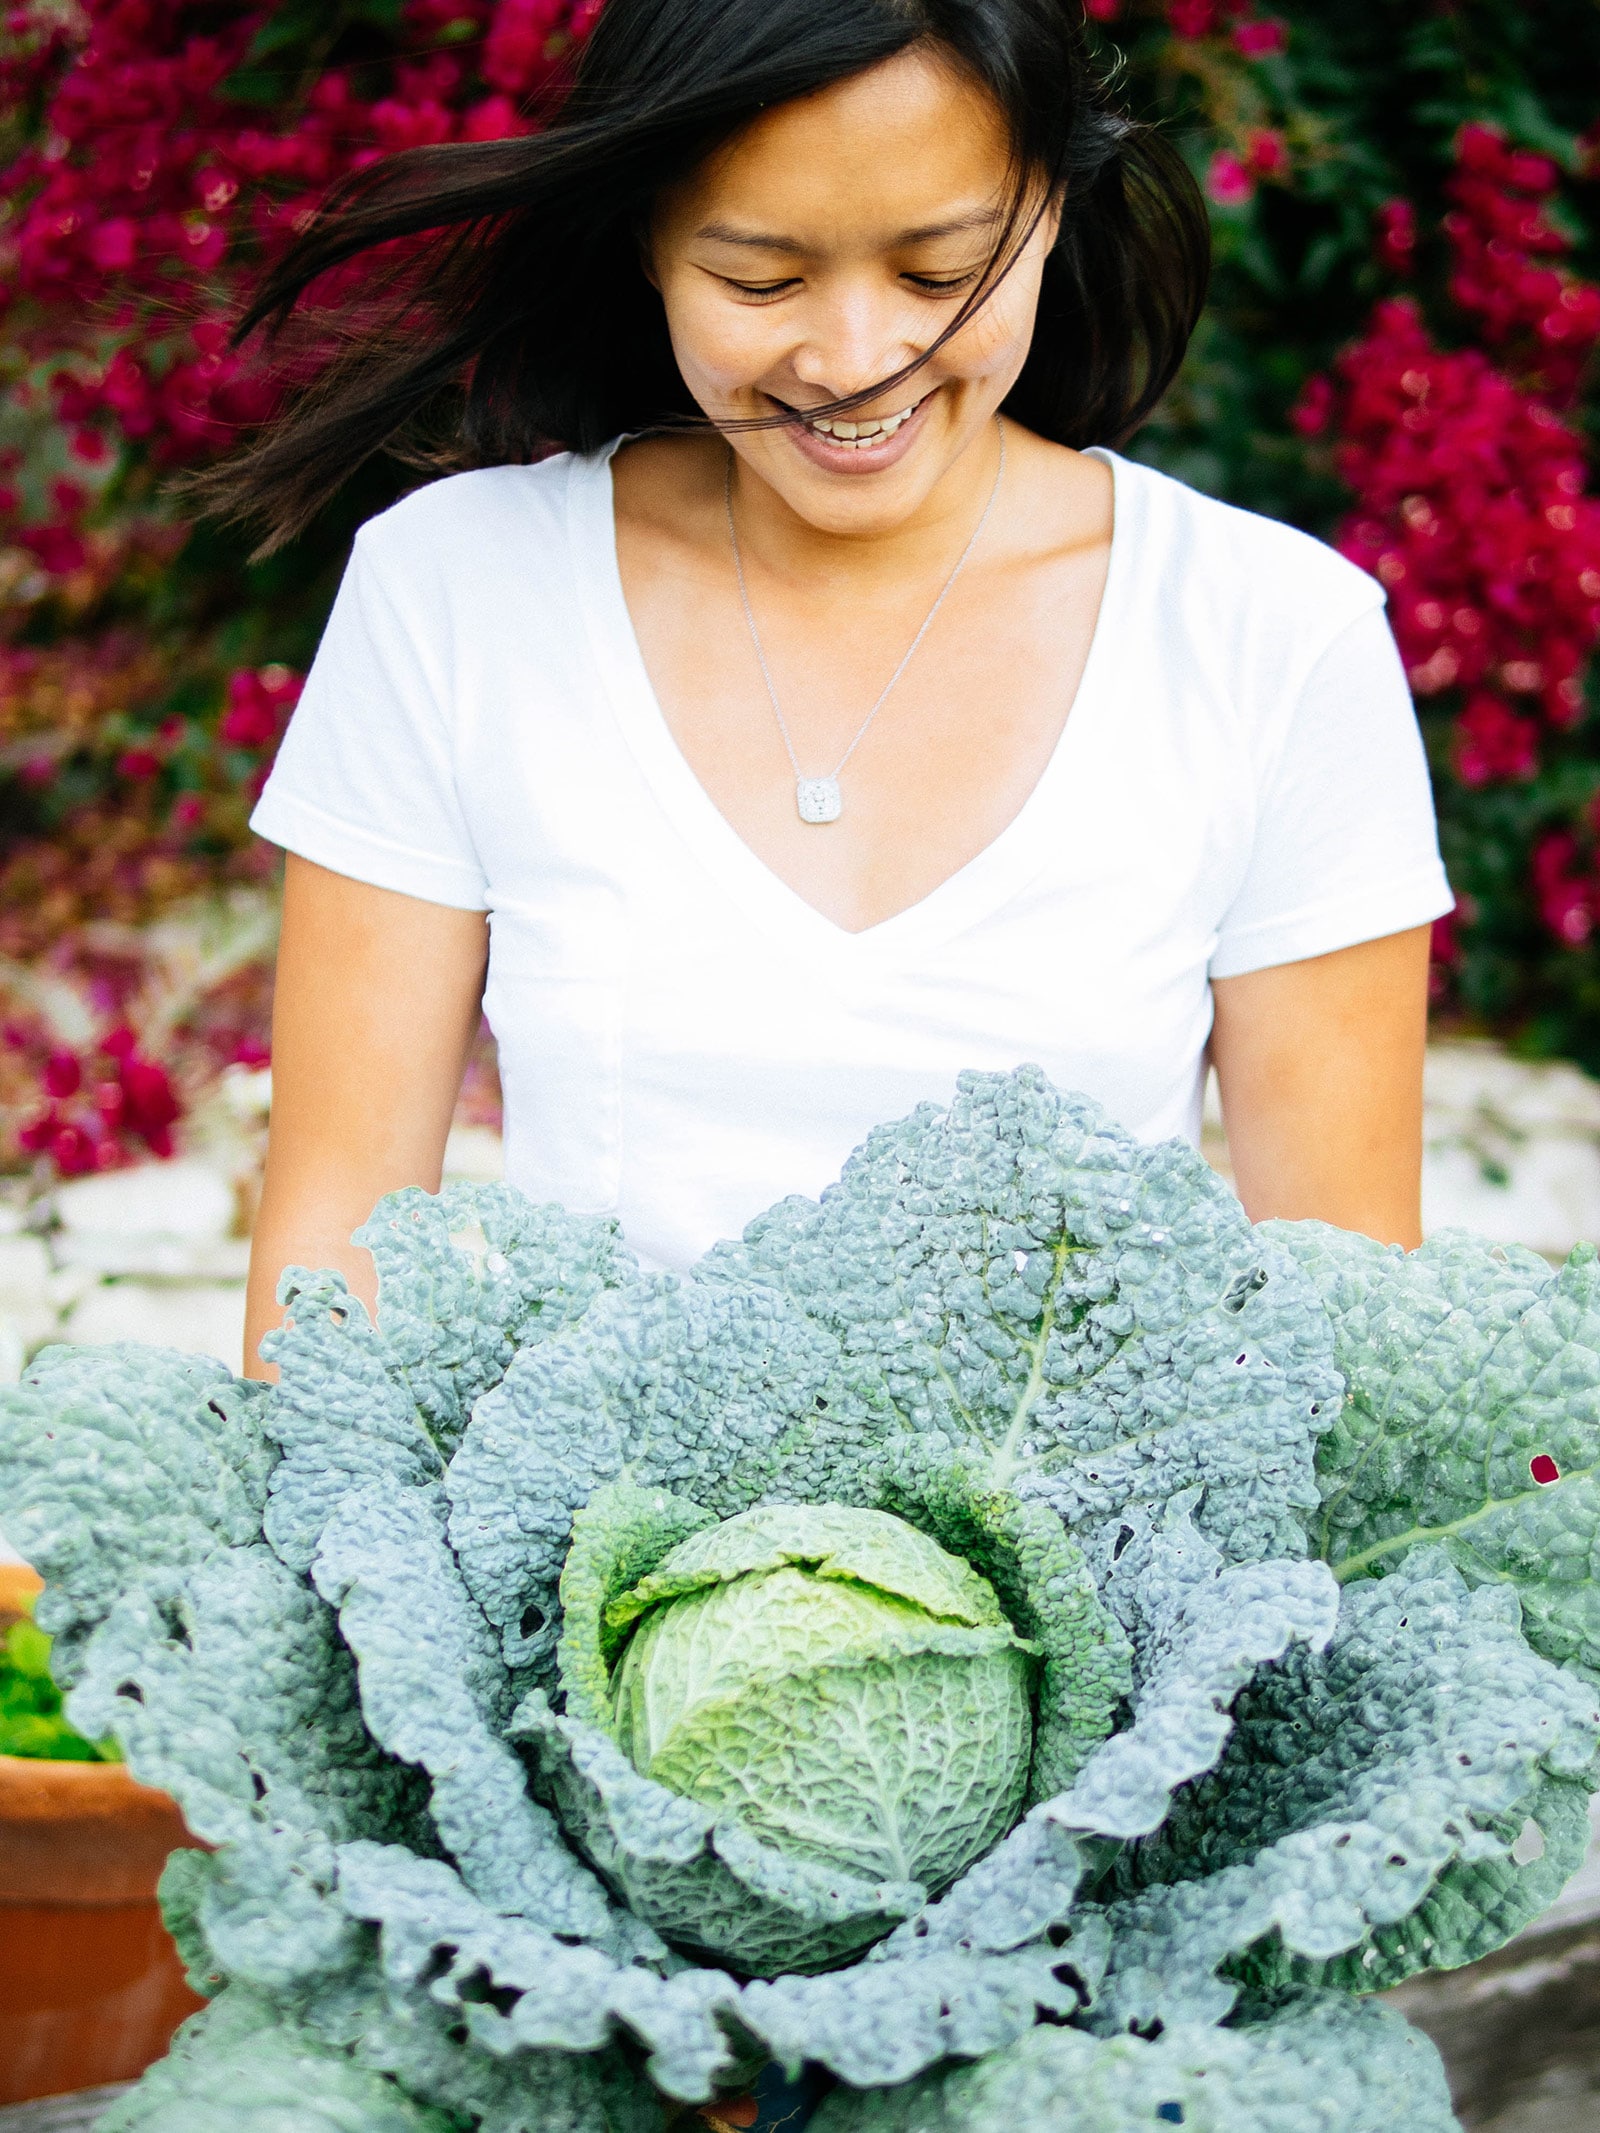 Woman (Linda Ly) holding a large head of cabbage in a garden, looking down at it and smiling